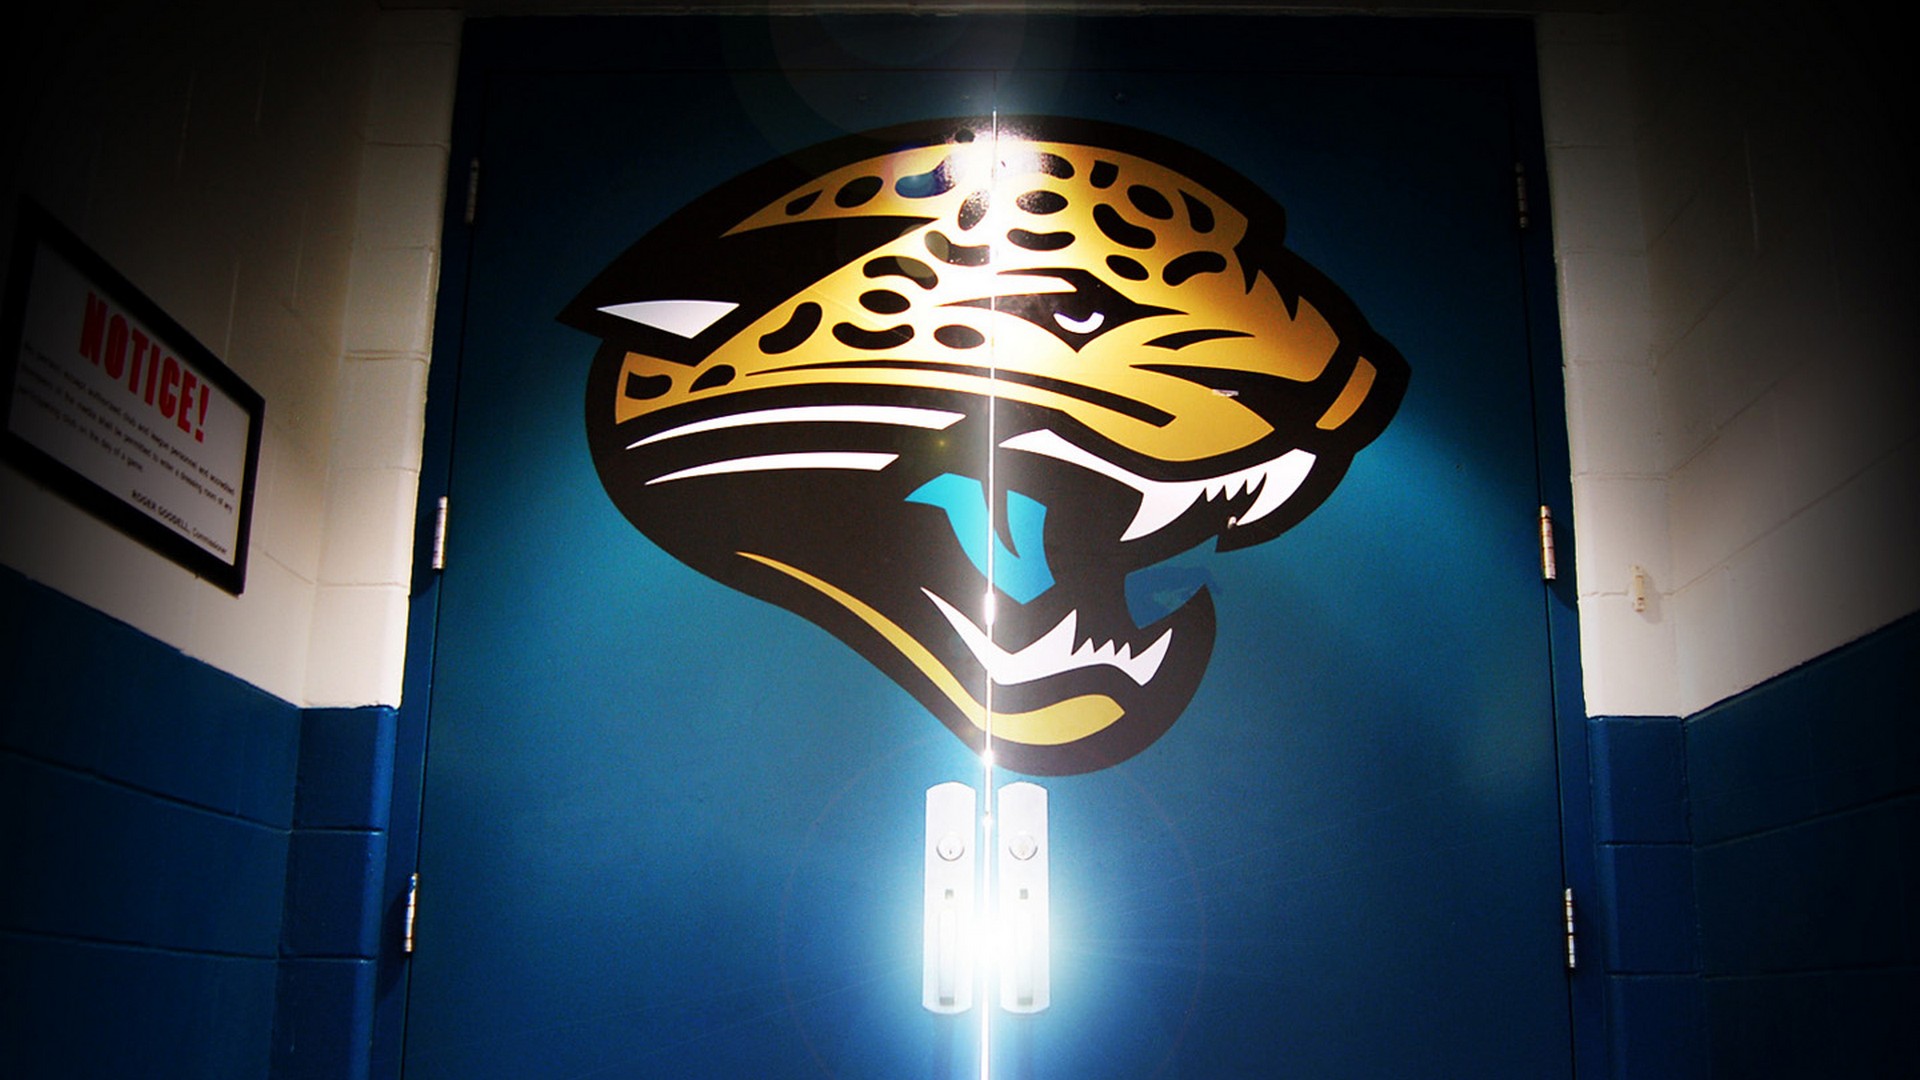 HD Backgrounds Jacksonville Jaguars with resolution 1920x1080 pixel. You can make this wallpaper for your Mac or Windows Desktop Background, iPhone, Android or Tablet and another Smartphone device